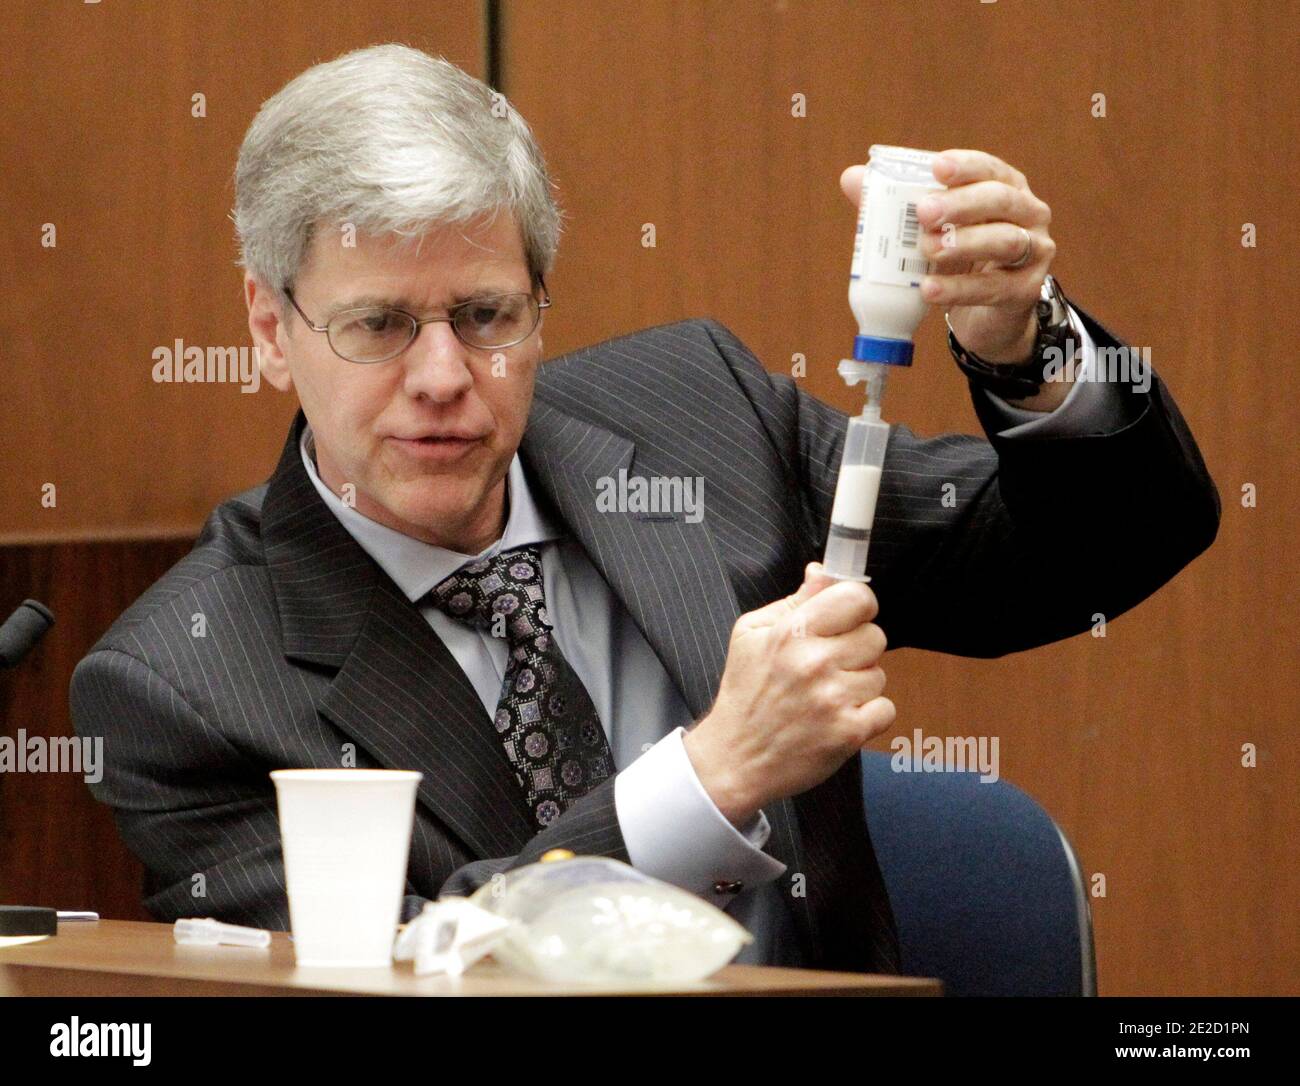 Anesthesiology expert Dr. Steven Shafer demonstrates how Propofol is extracted out of a glass bottle with a syringe during Dr. Conrad Murray's involuntary manslaughter trial in downtown Los Angeles on October 19, 2011. Murray has pleaded not guilty and faces four years in prison and the loss of his medical license if convicted of involuntary manslaughter in Michael Jackson's death. Photo by Reed Saxon/Pool/ABACAPRESS.COM Stock Photo